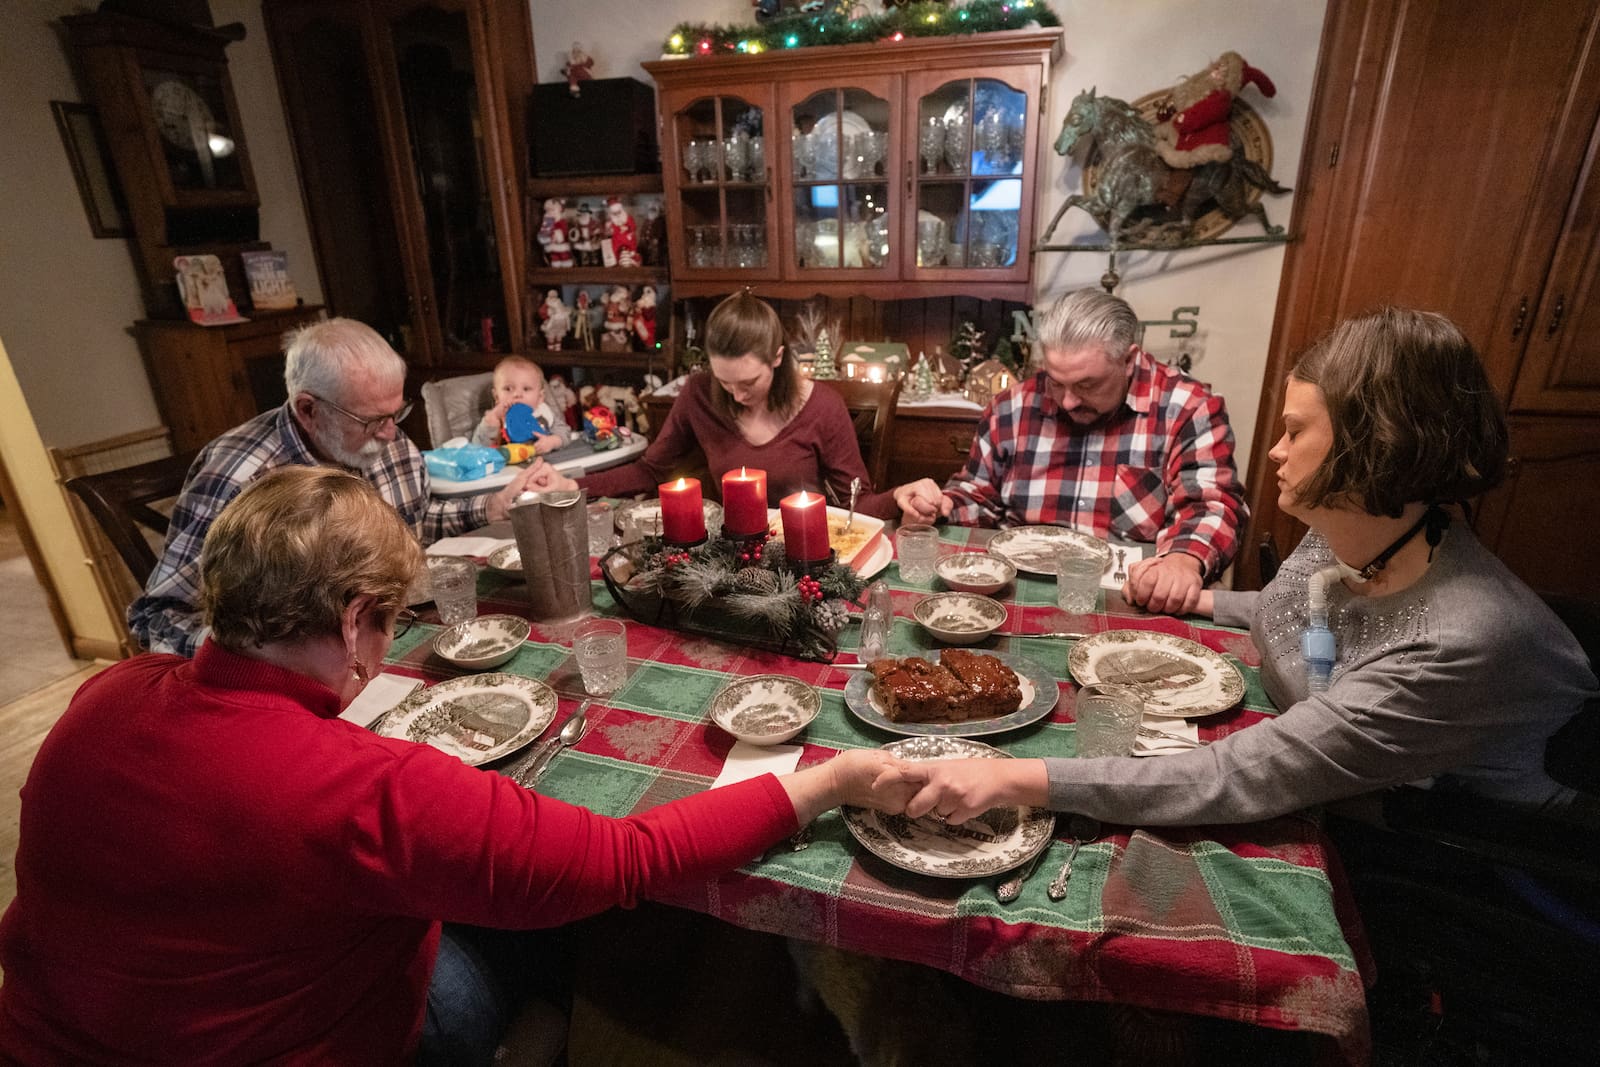 Josie and family around dinner table with Christmas decor holding hands to say grace